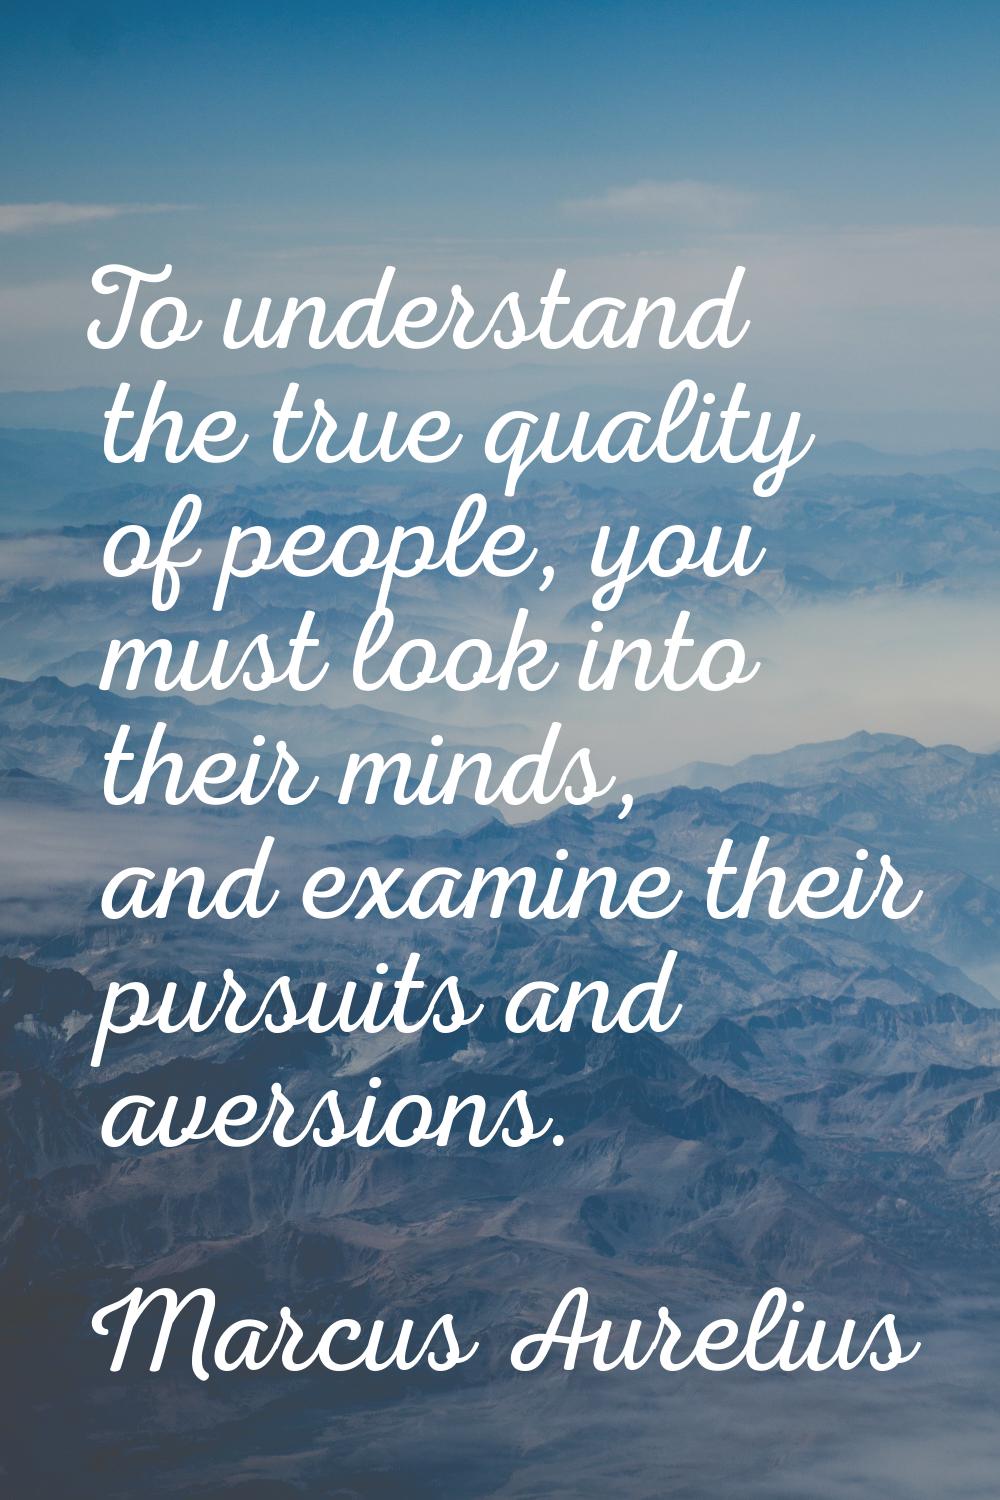 To understand the true quality of people, you must look into their minds, and examine their pursuit